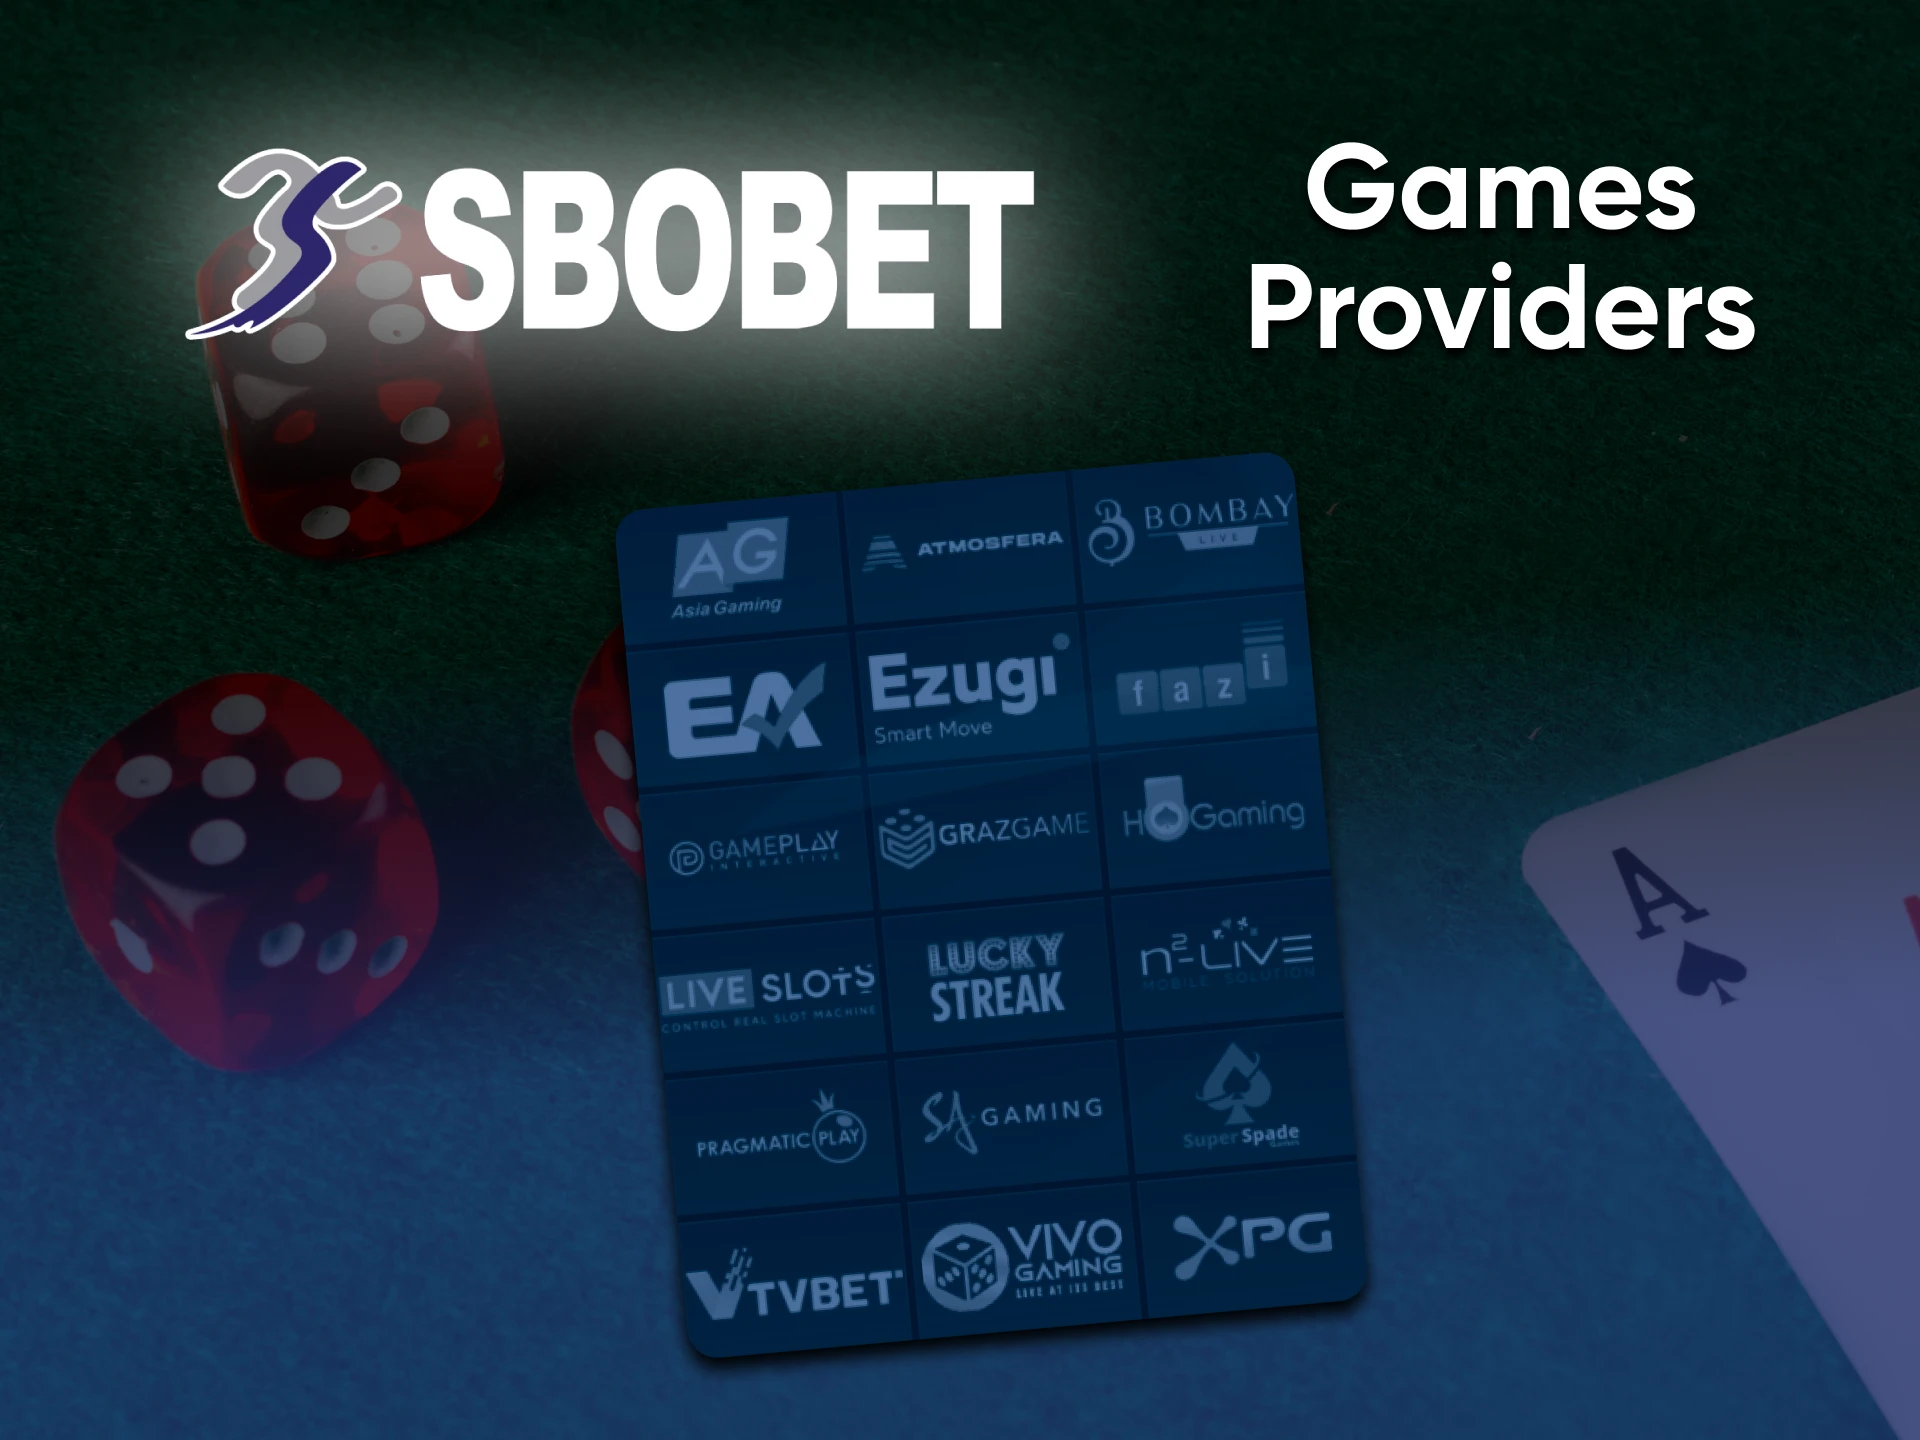 The Sbobet website uses trusted casino game providers.